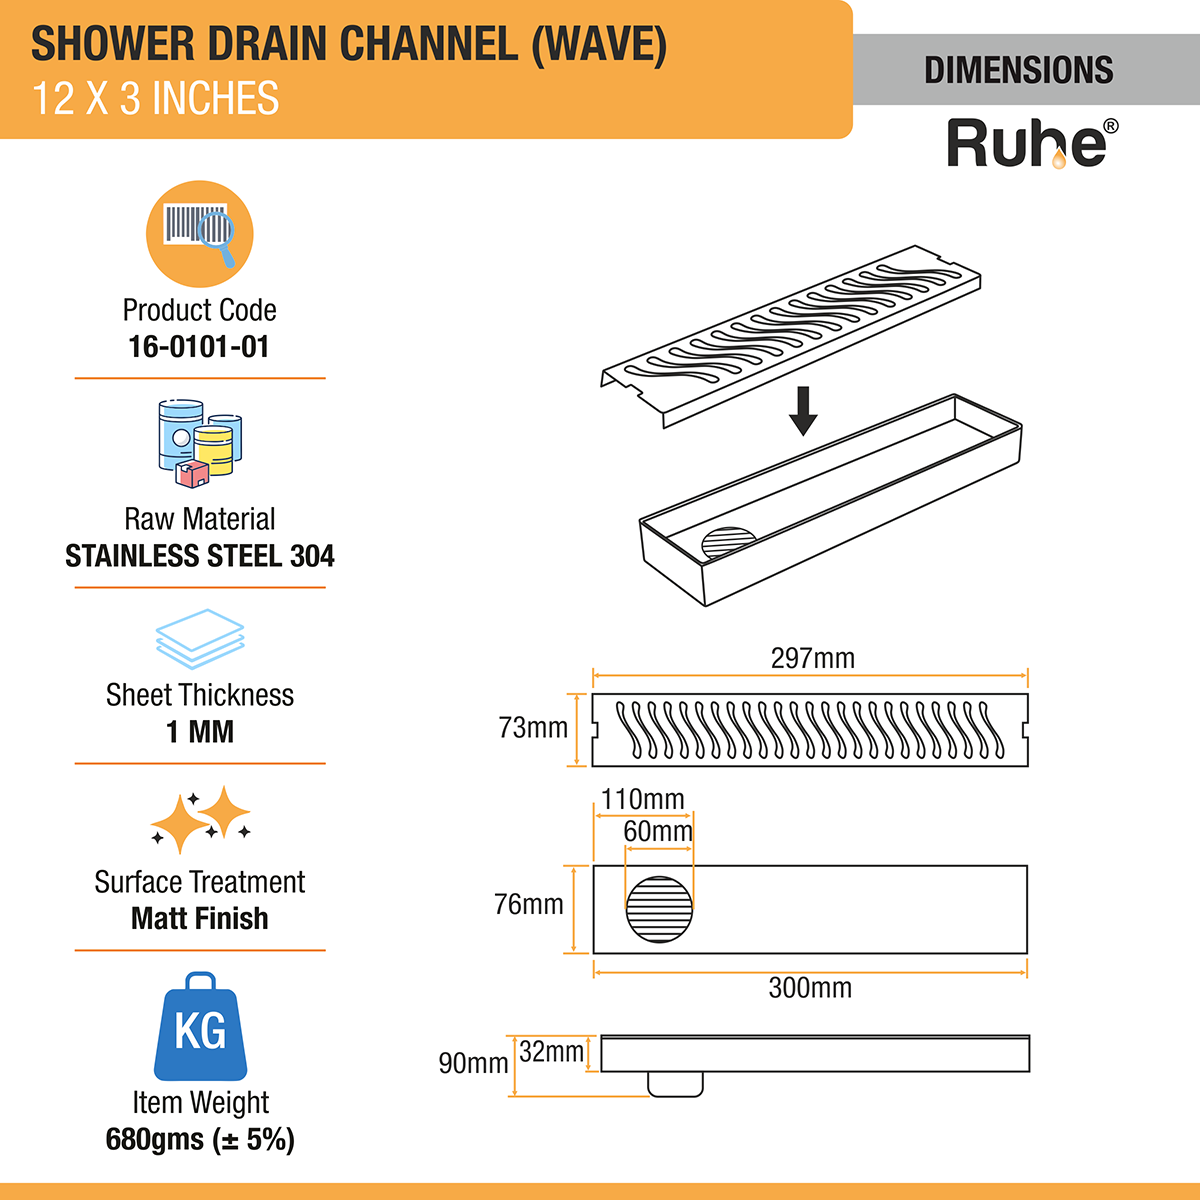 Wave Shower Drain Channel (12 X 3 Inches) with Cockroach Trap (304 Grade) dimensions and size